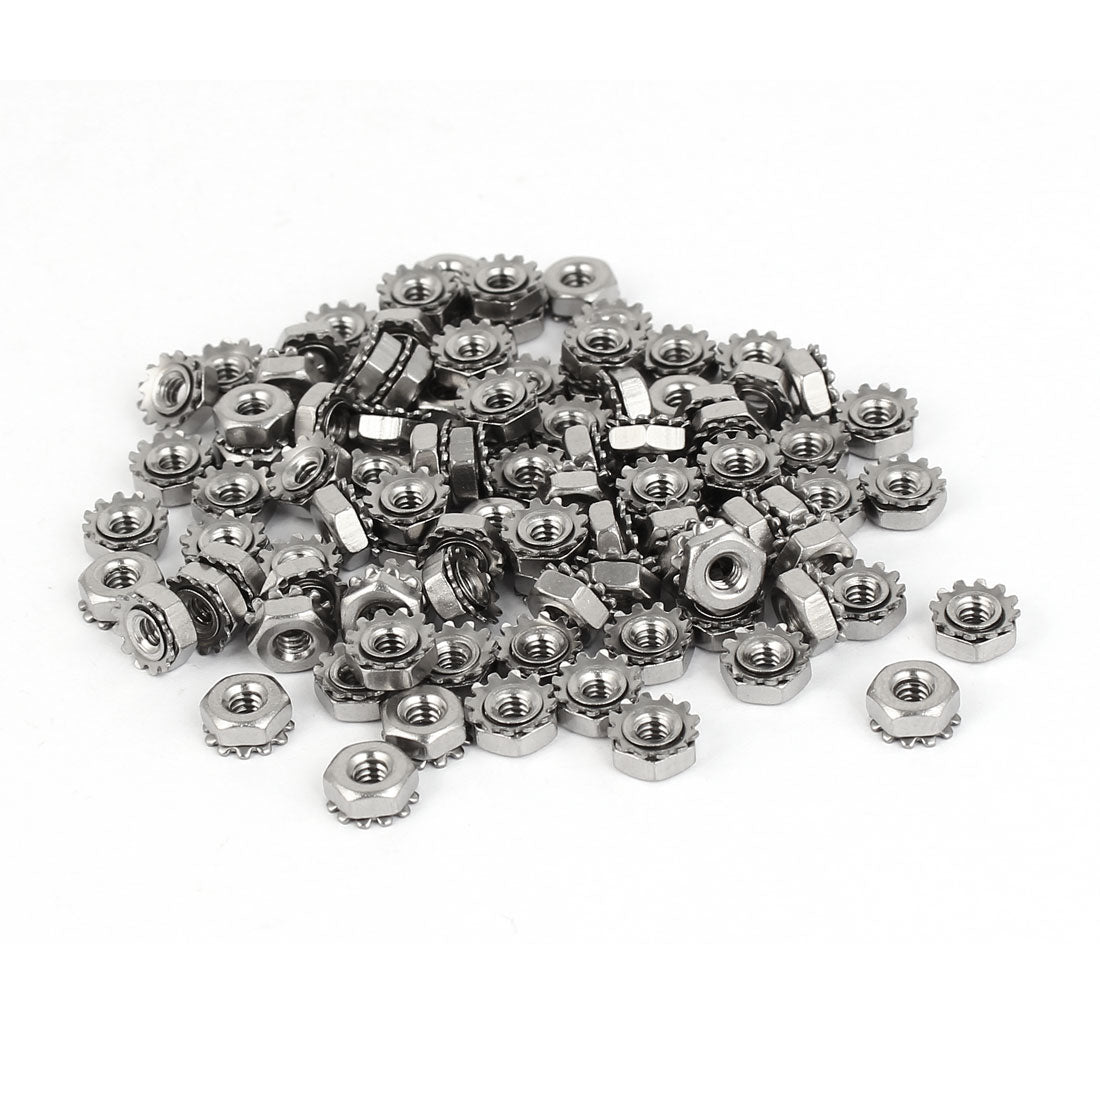 uxcell Uxcell 4#-40 304 Stainless Steel Female Thread Kep Hex Head Lock Nut 100pcs